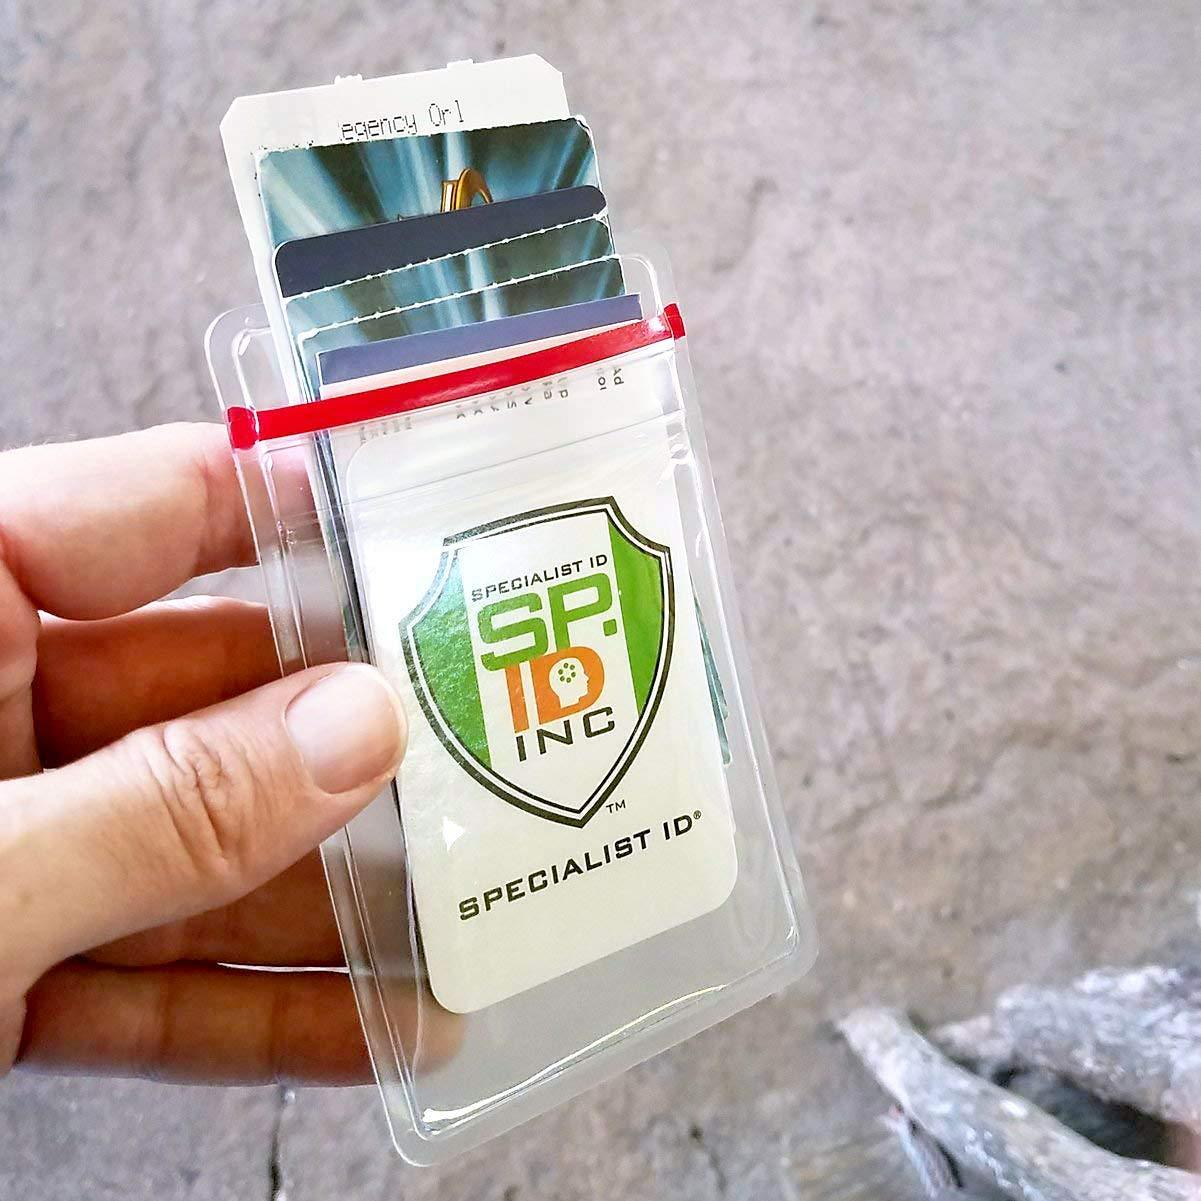 A hand holding several cards inside a clear plastic holder with a red strap. The front card has a logo containing "SF INC" and the text "Specialist ID". The Heavy Duty Vertical Multi-Card Badge Holder with Resealable Zip Top (1815-1110) boasts a resealable top for added security and features a vertical ID display.